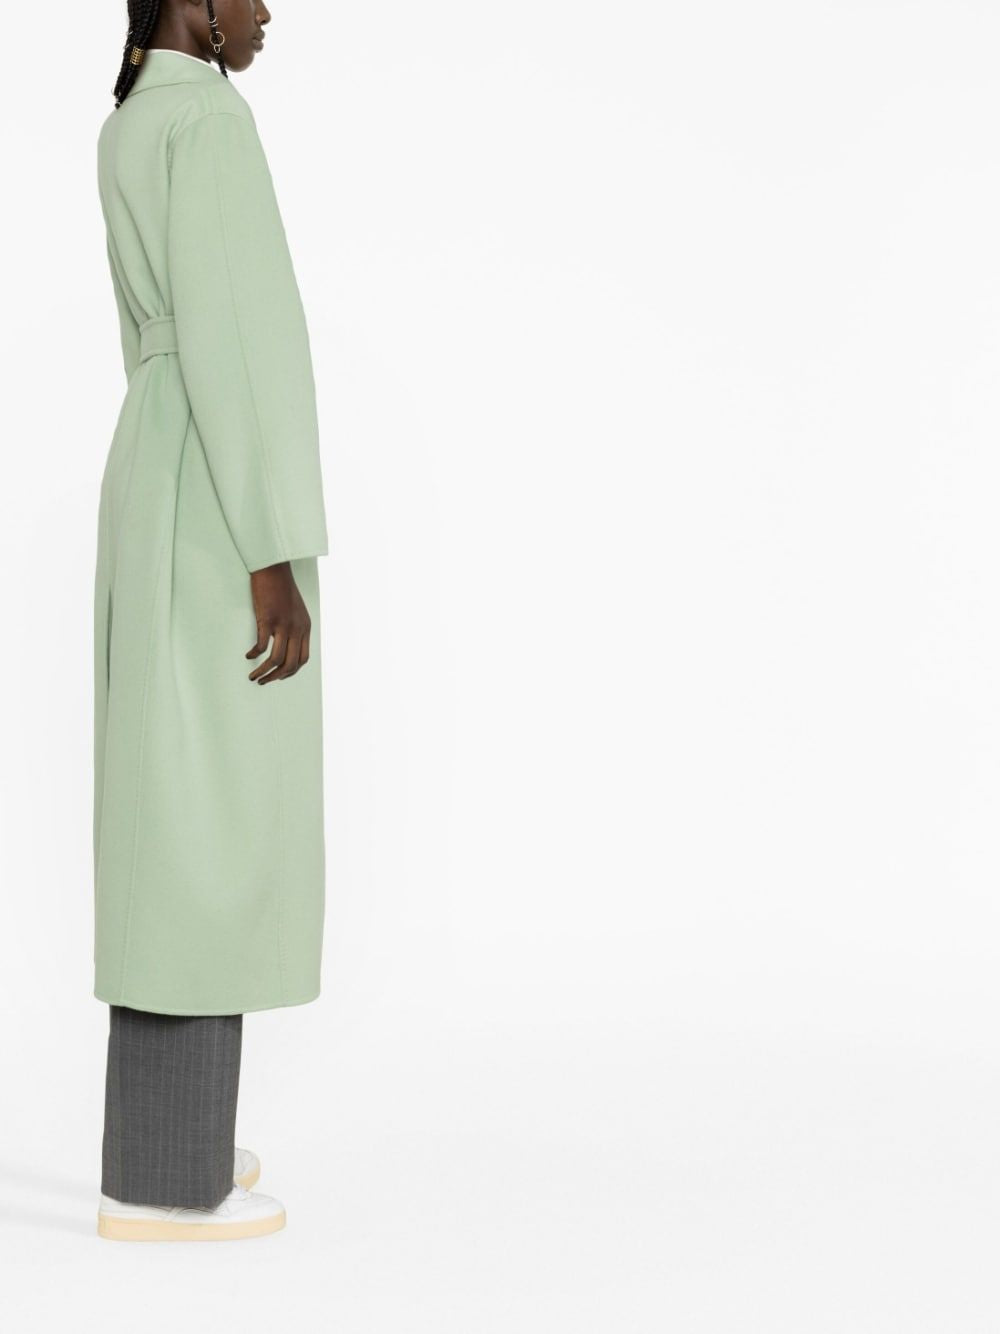 MAX MARA Pastel Green Wool and Cashmere Jacket - Women's Fashion Outerwear for SS23